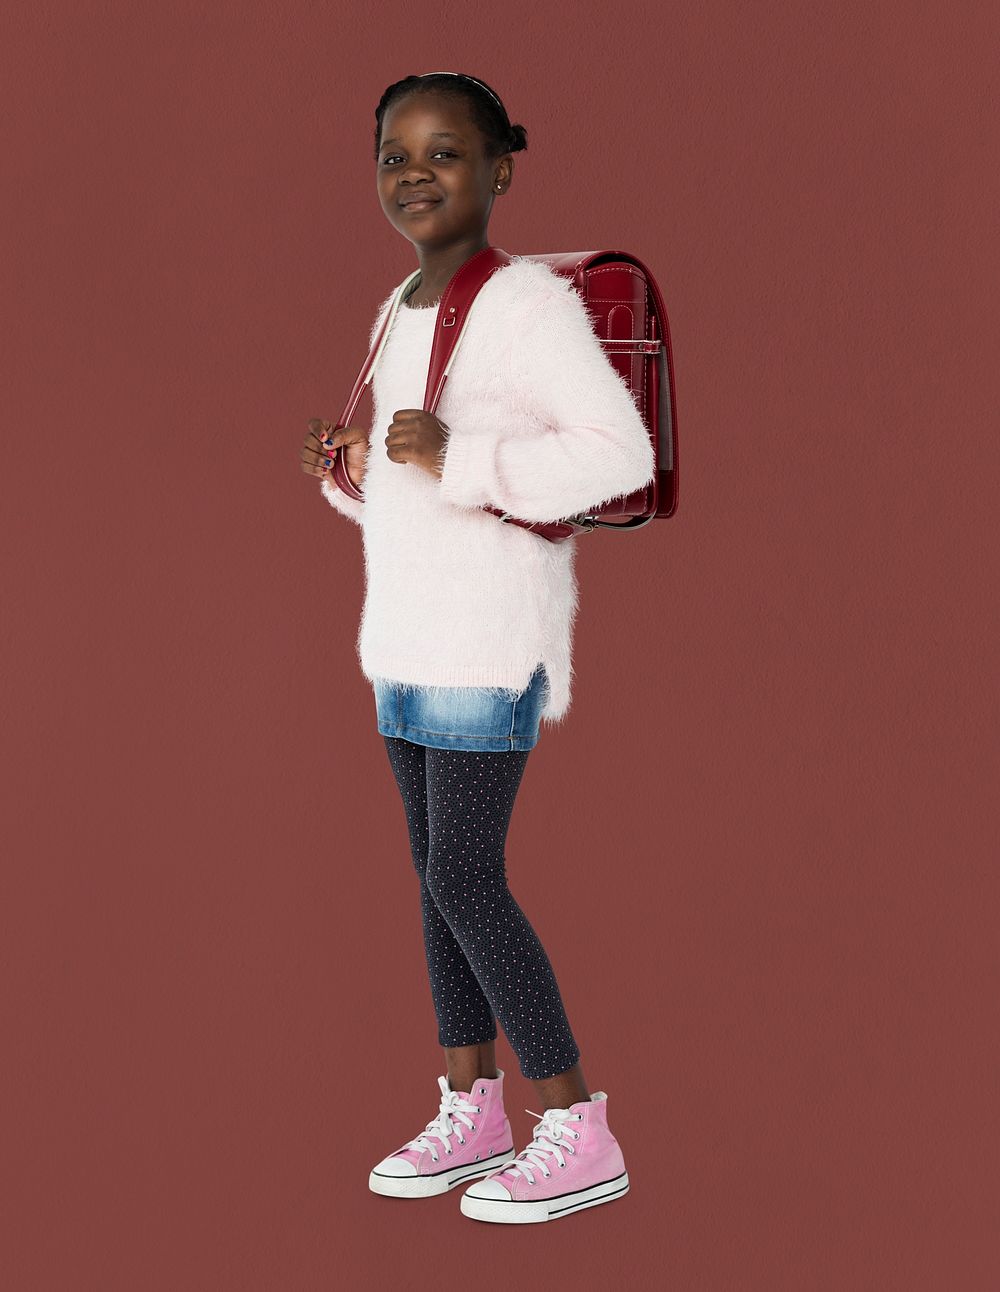 Young black kid student with a backpack full body portrait